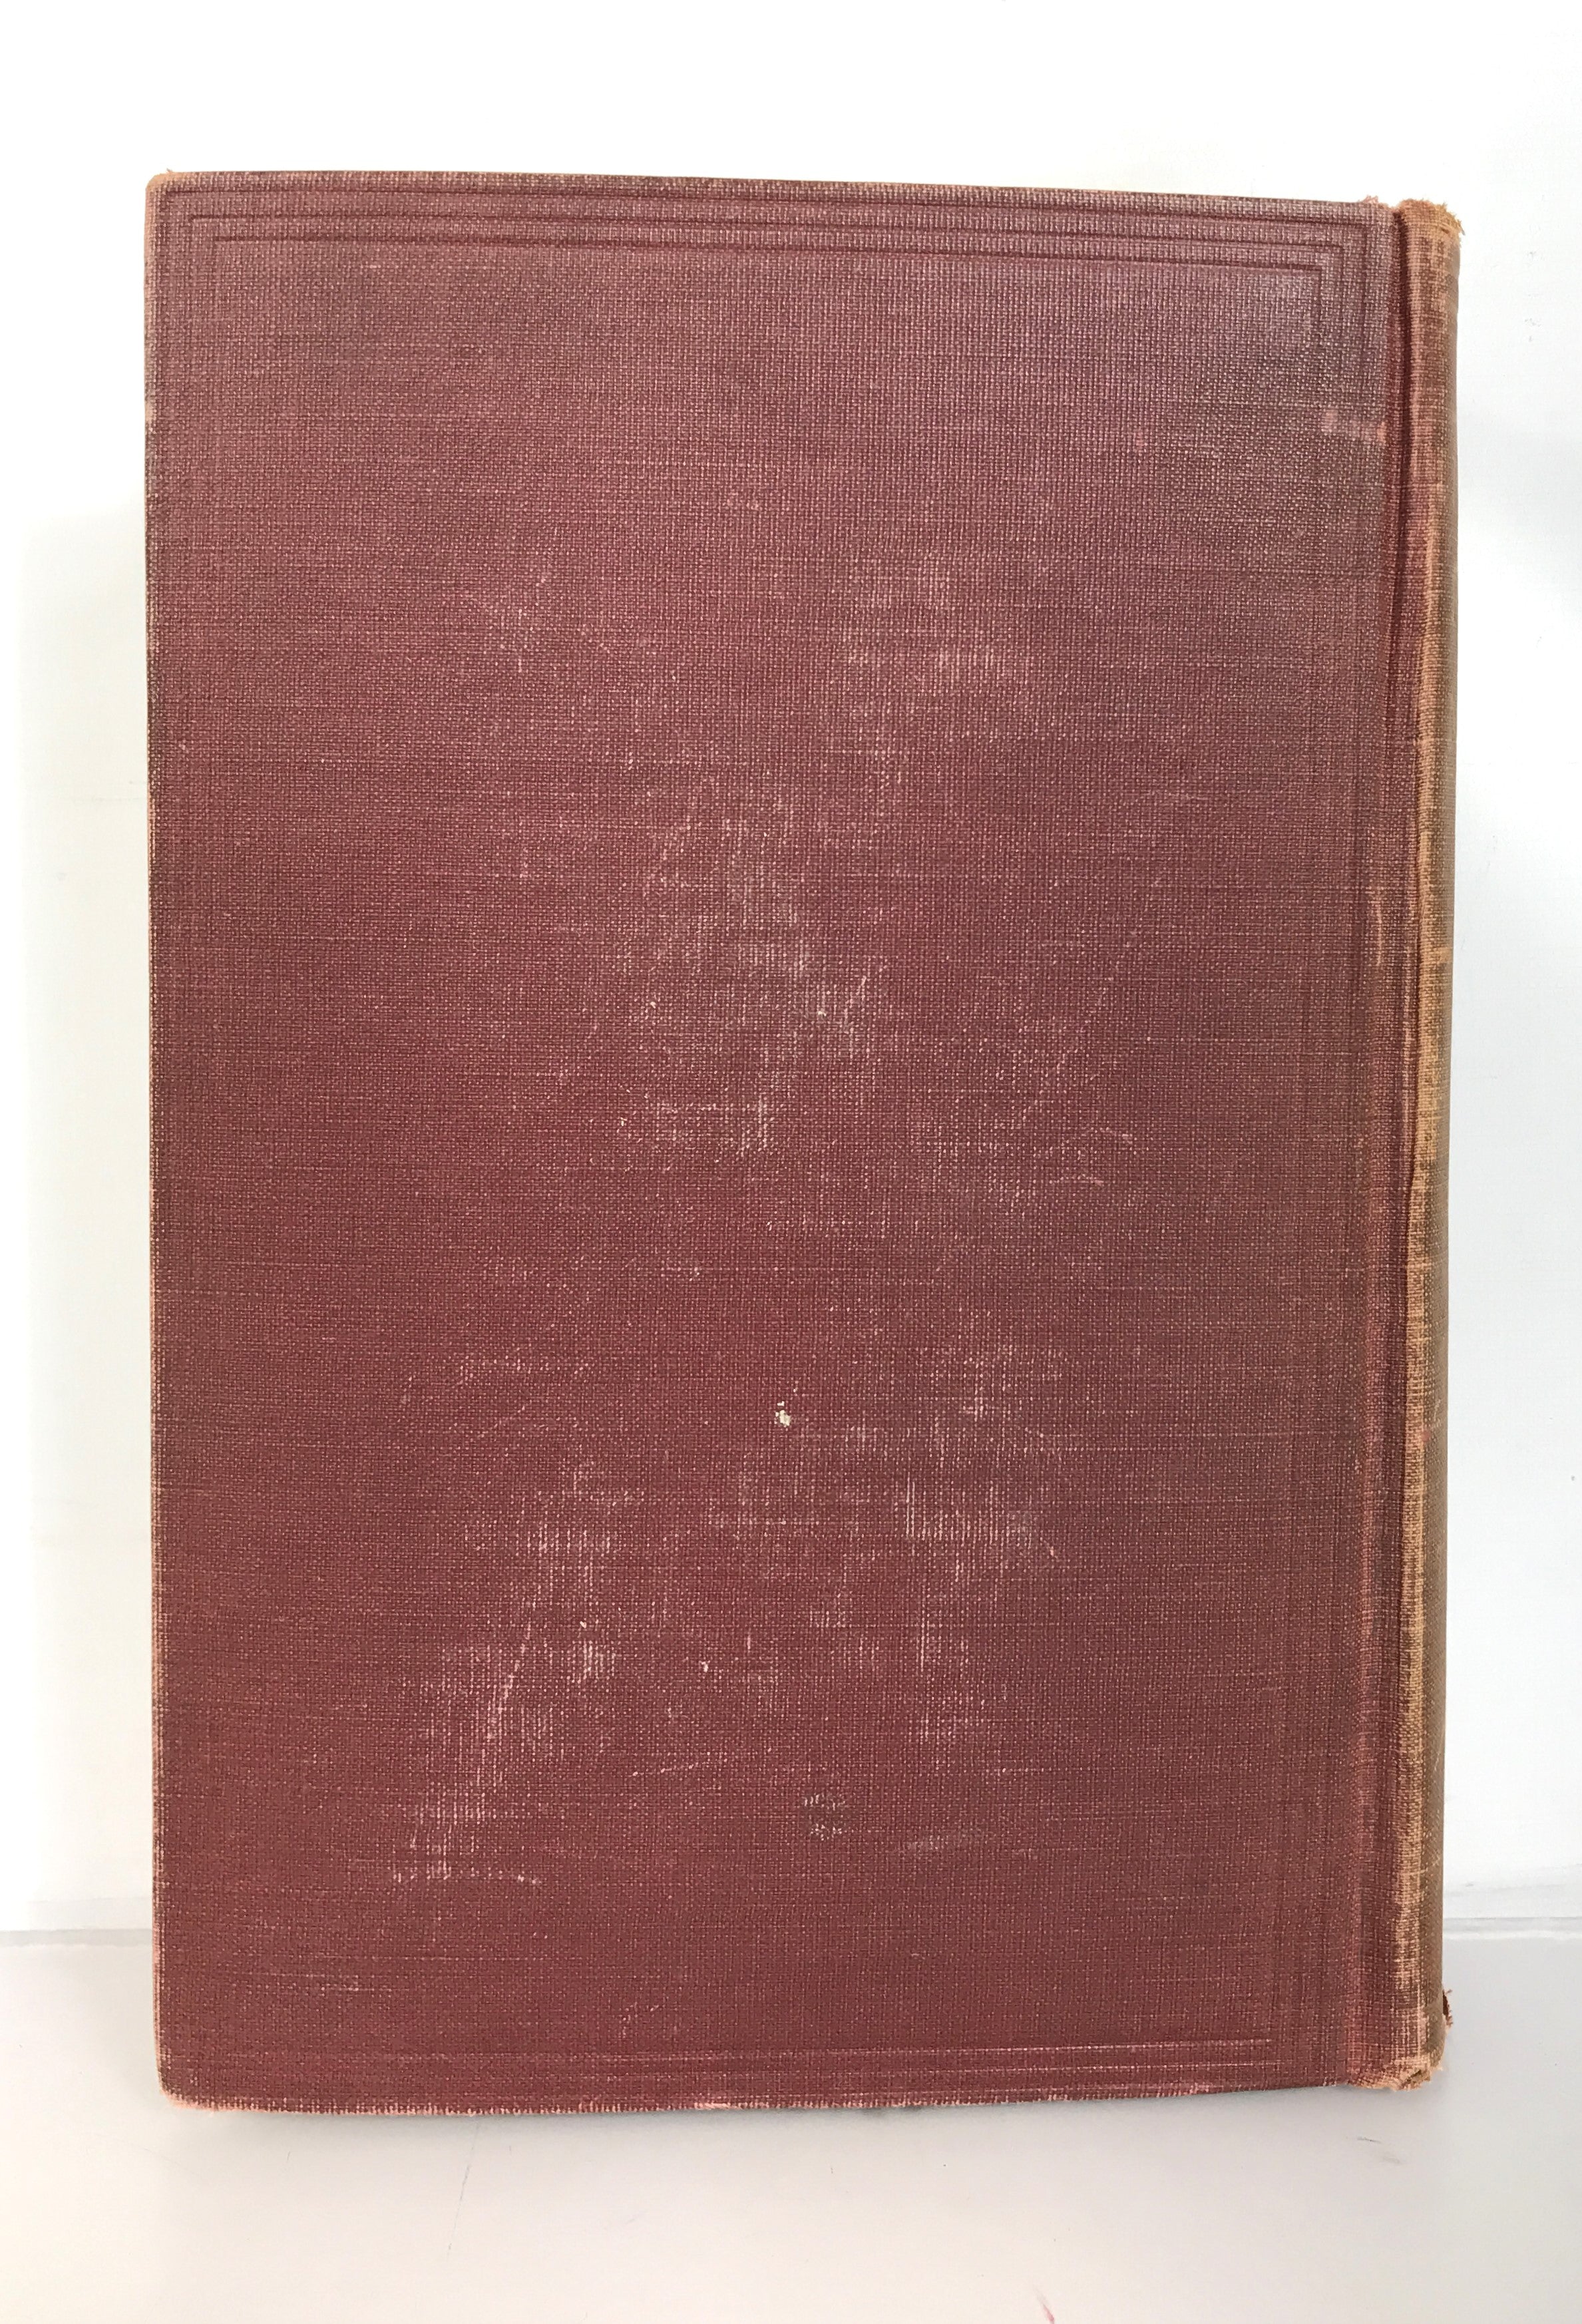 Osler's Principles and Practice of Medicine by McCrae Eleventh Edition 1930 HC